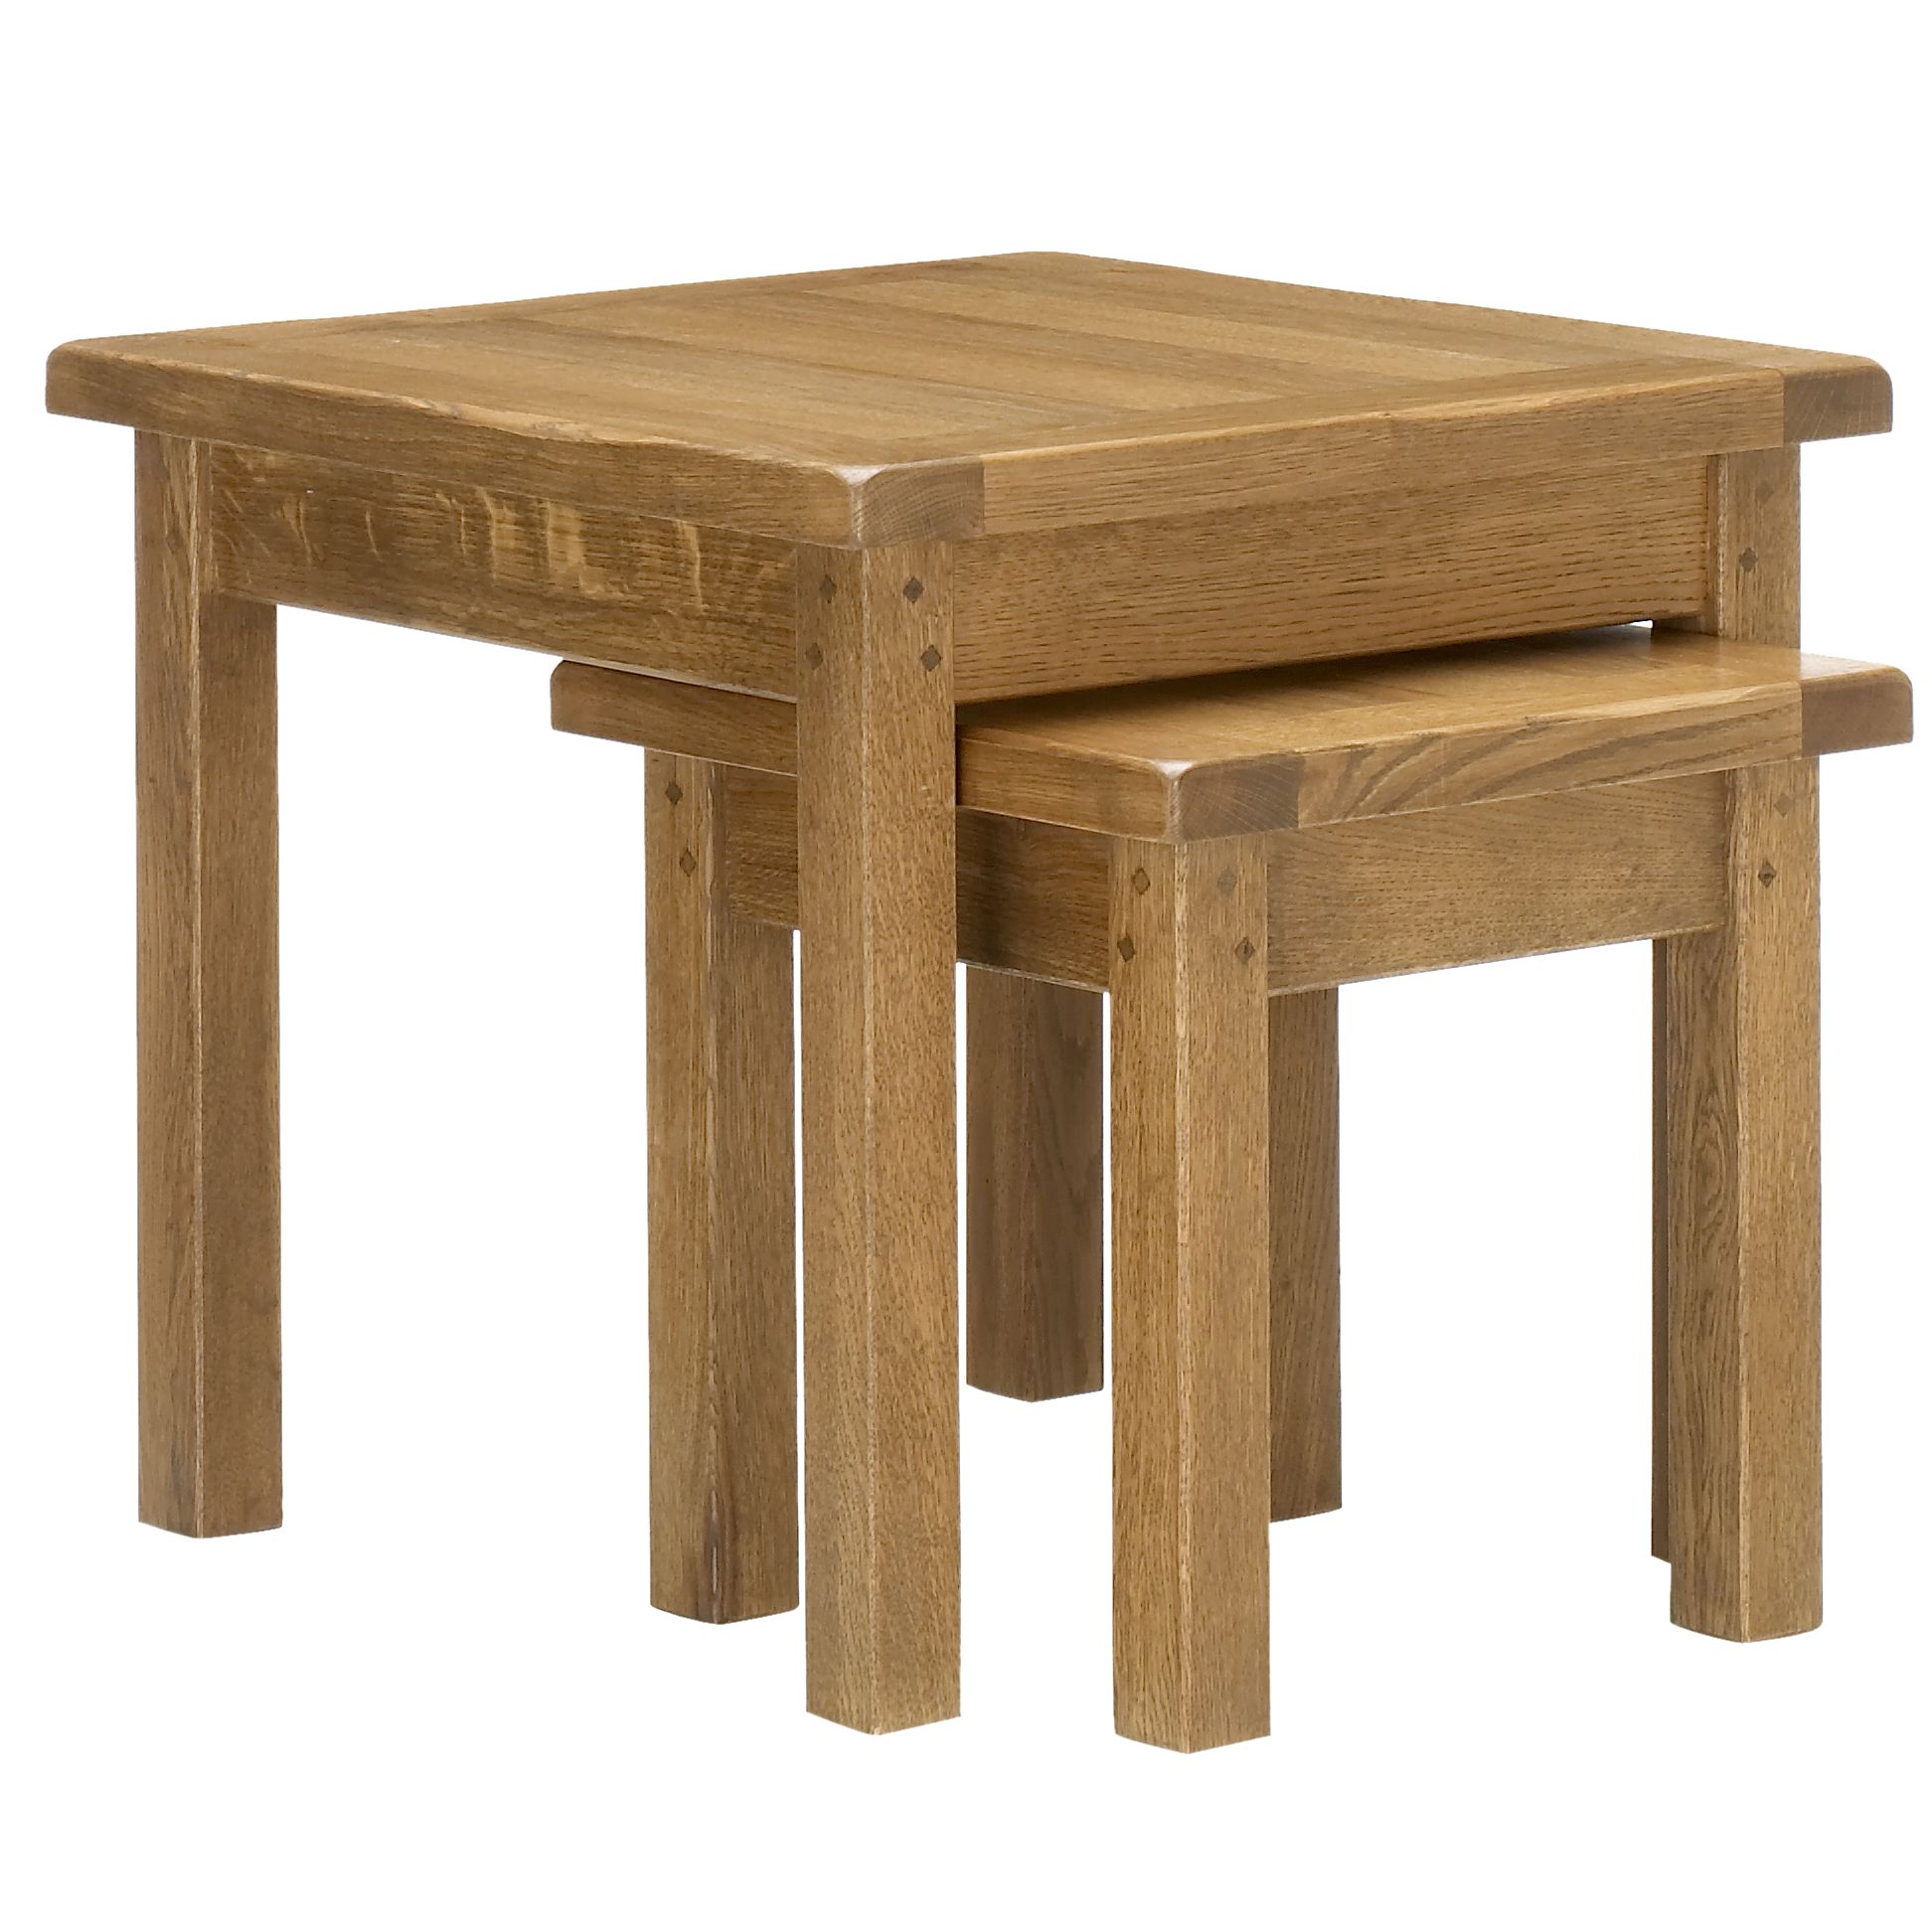 Ardennes Nest of 2 Tables, Cognac at John Lewis